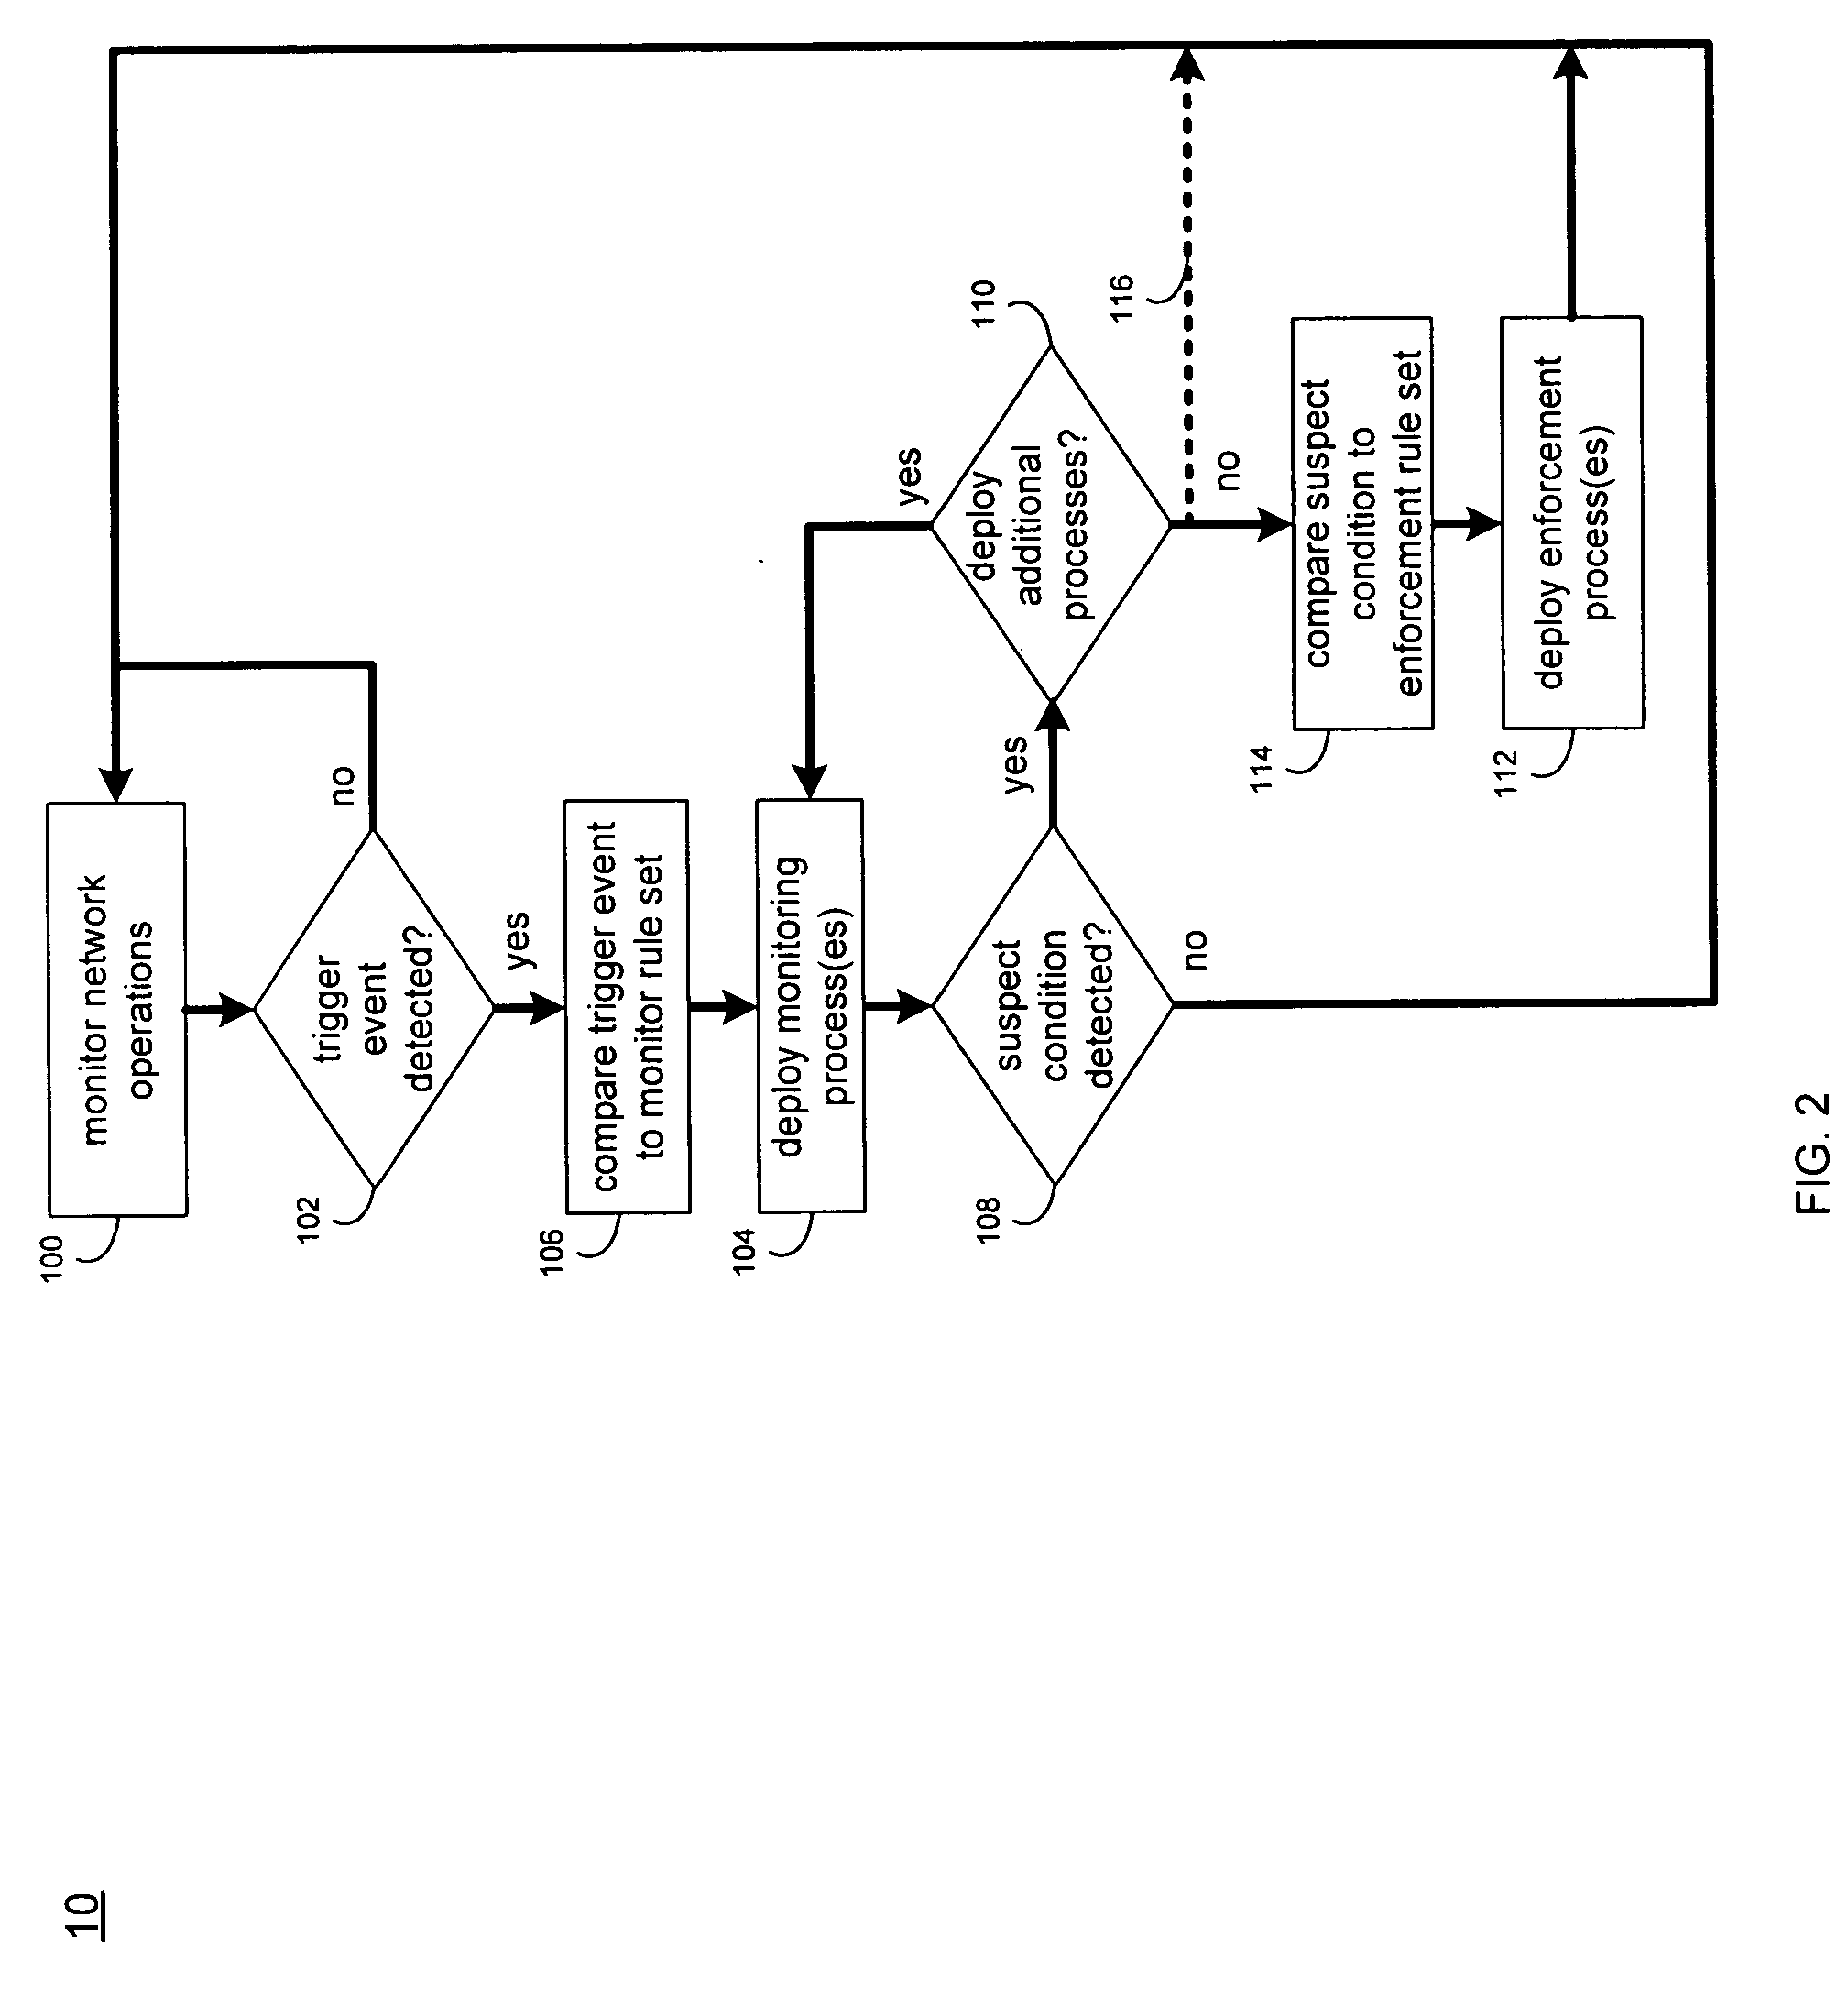 Dynamic network detection system and method